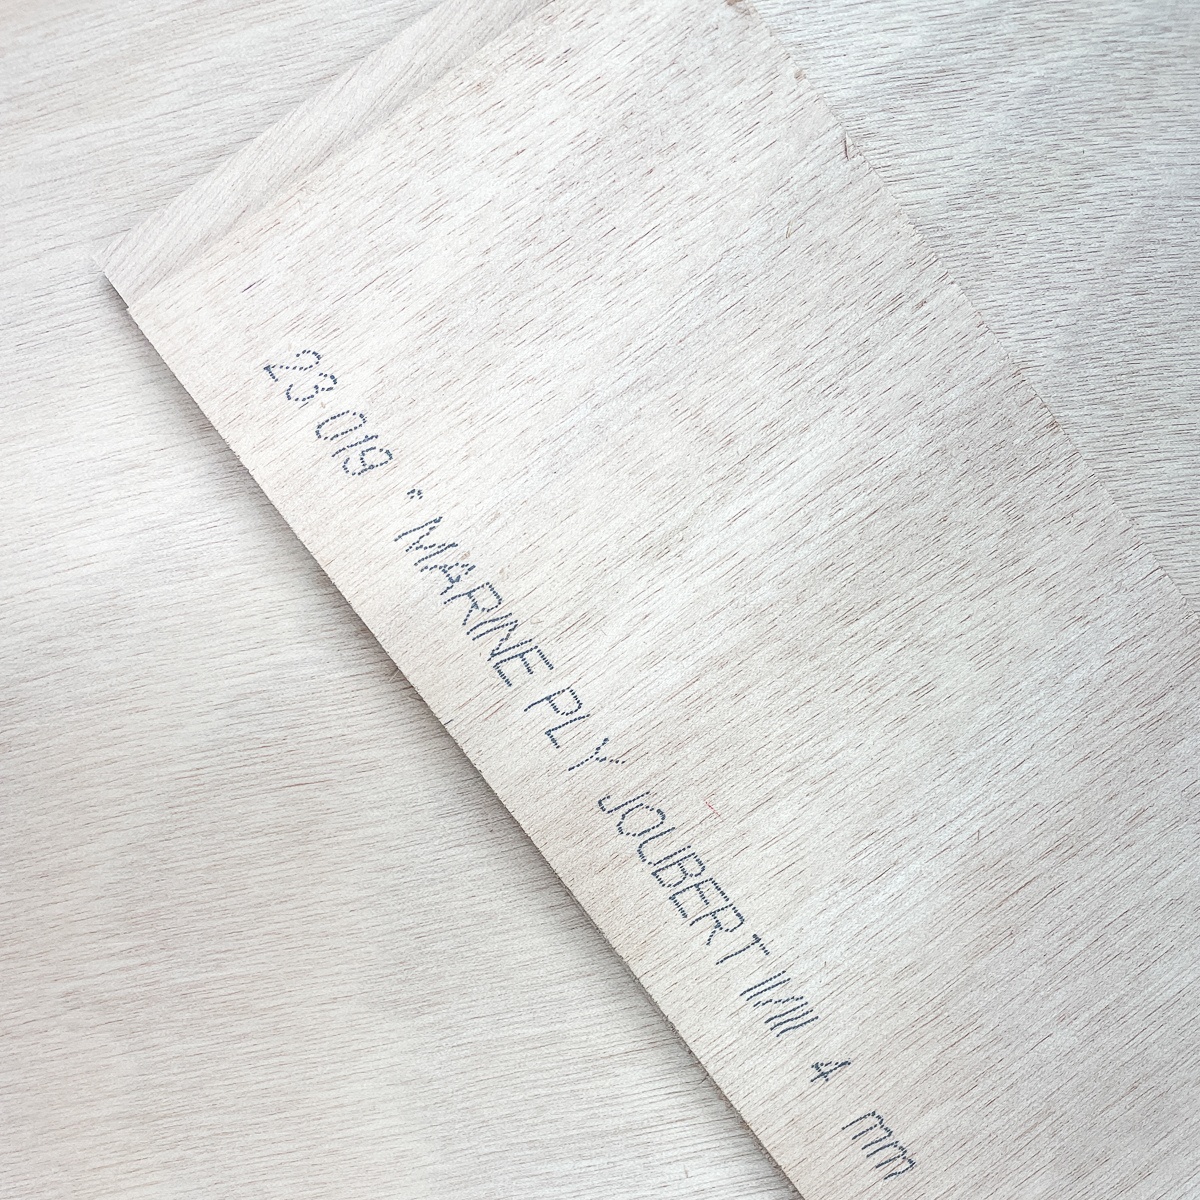 4mm marine plywood to be used for DIY garden labels